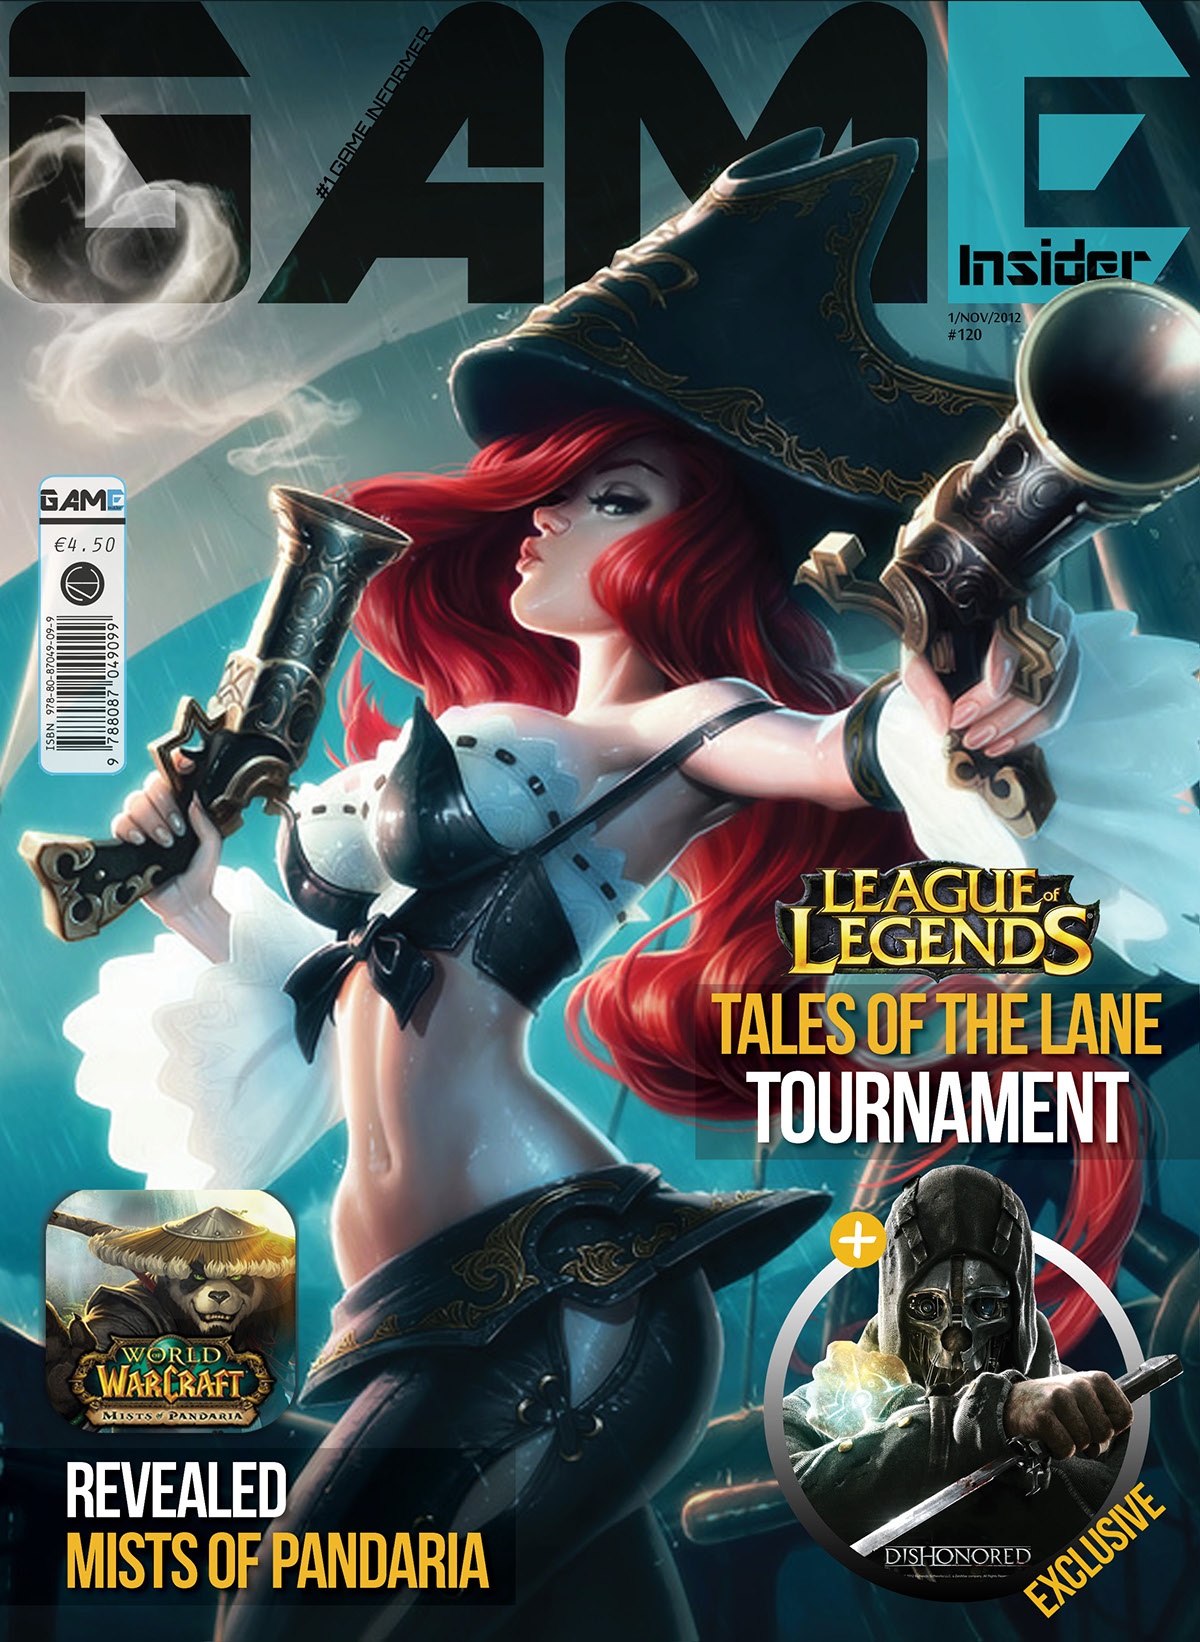 magazine cover game insider Gamer league of legends zozzy world warcraft Dishonored playstation PC